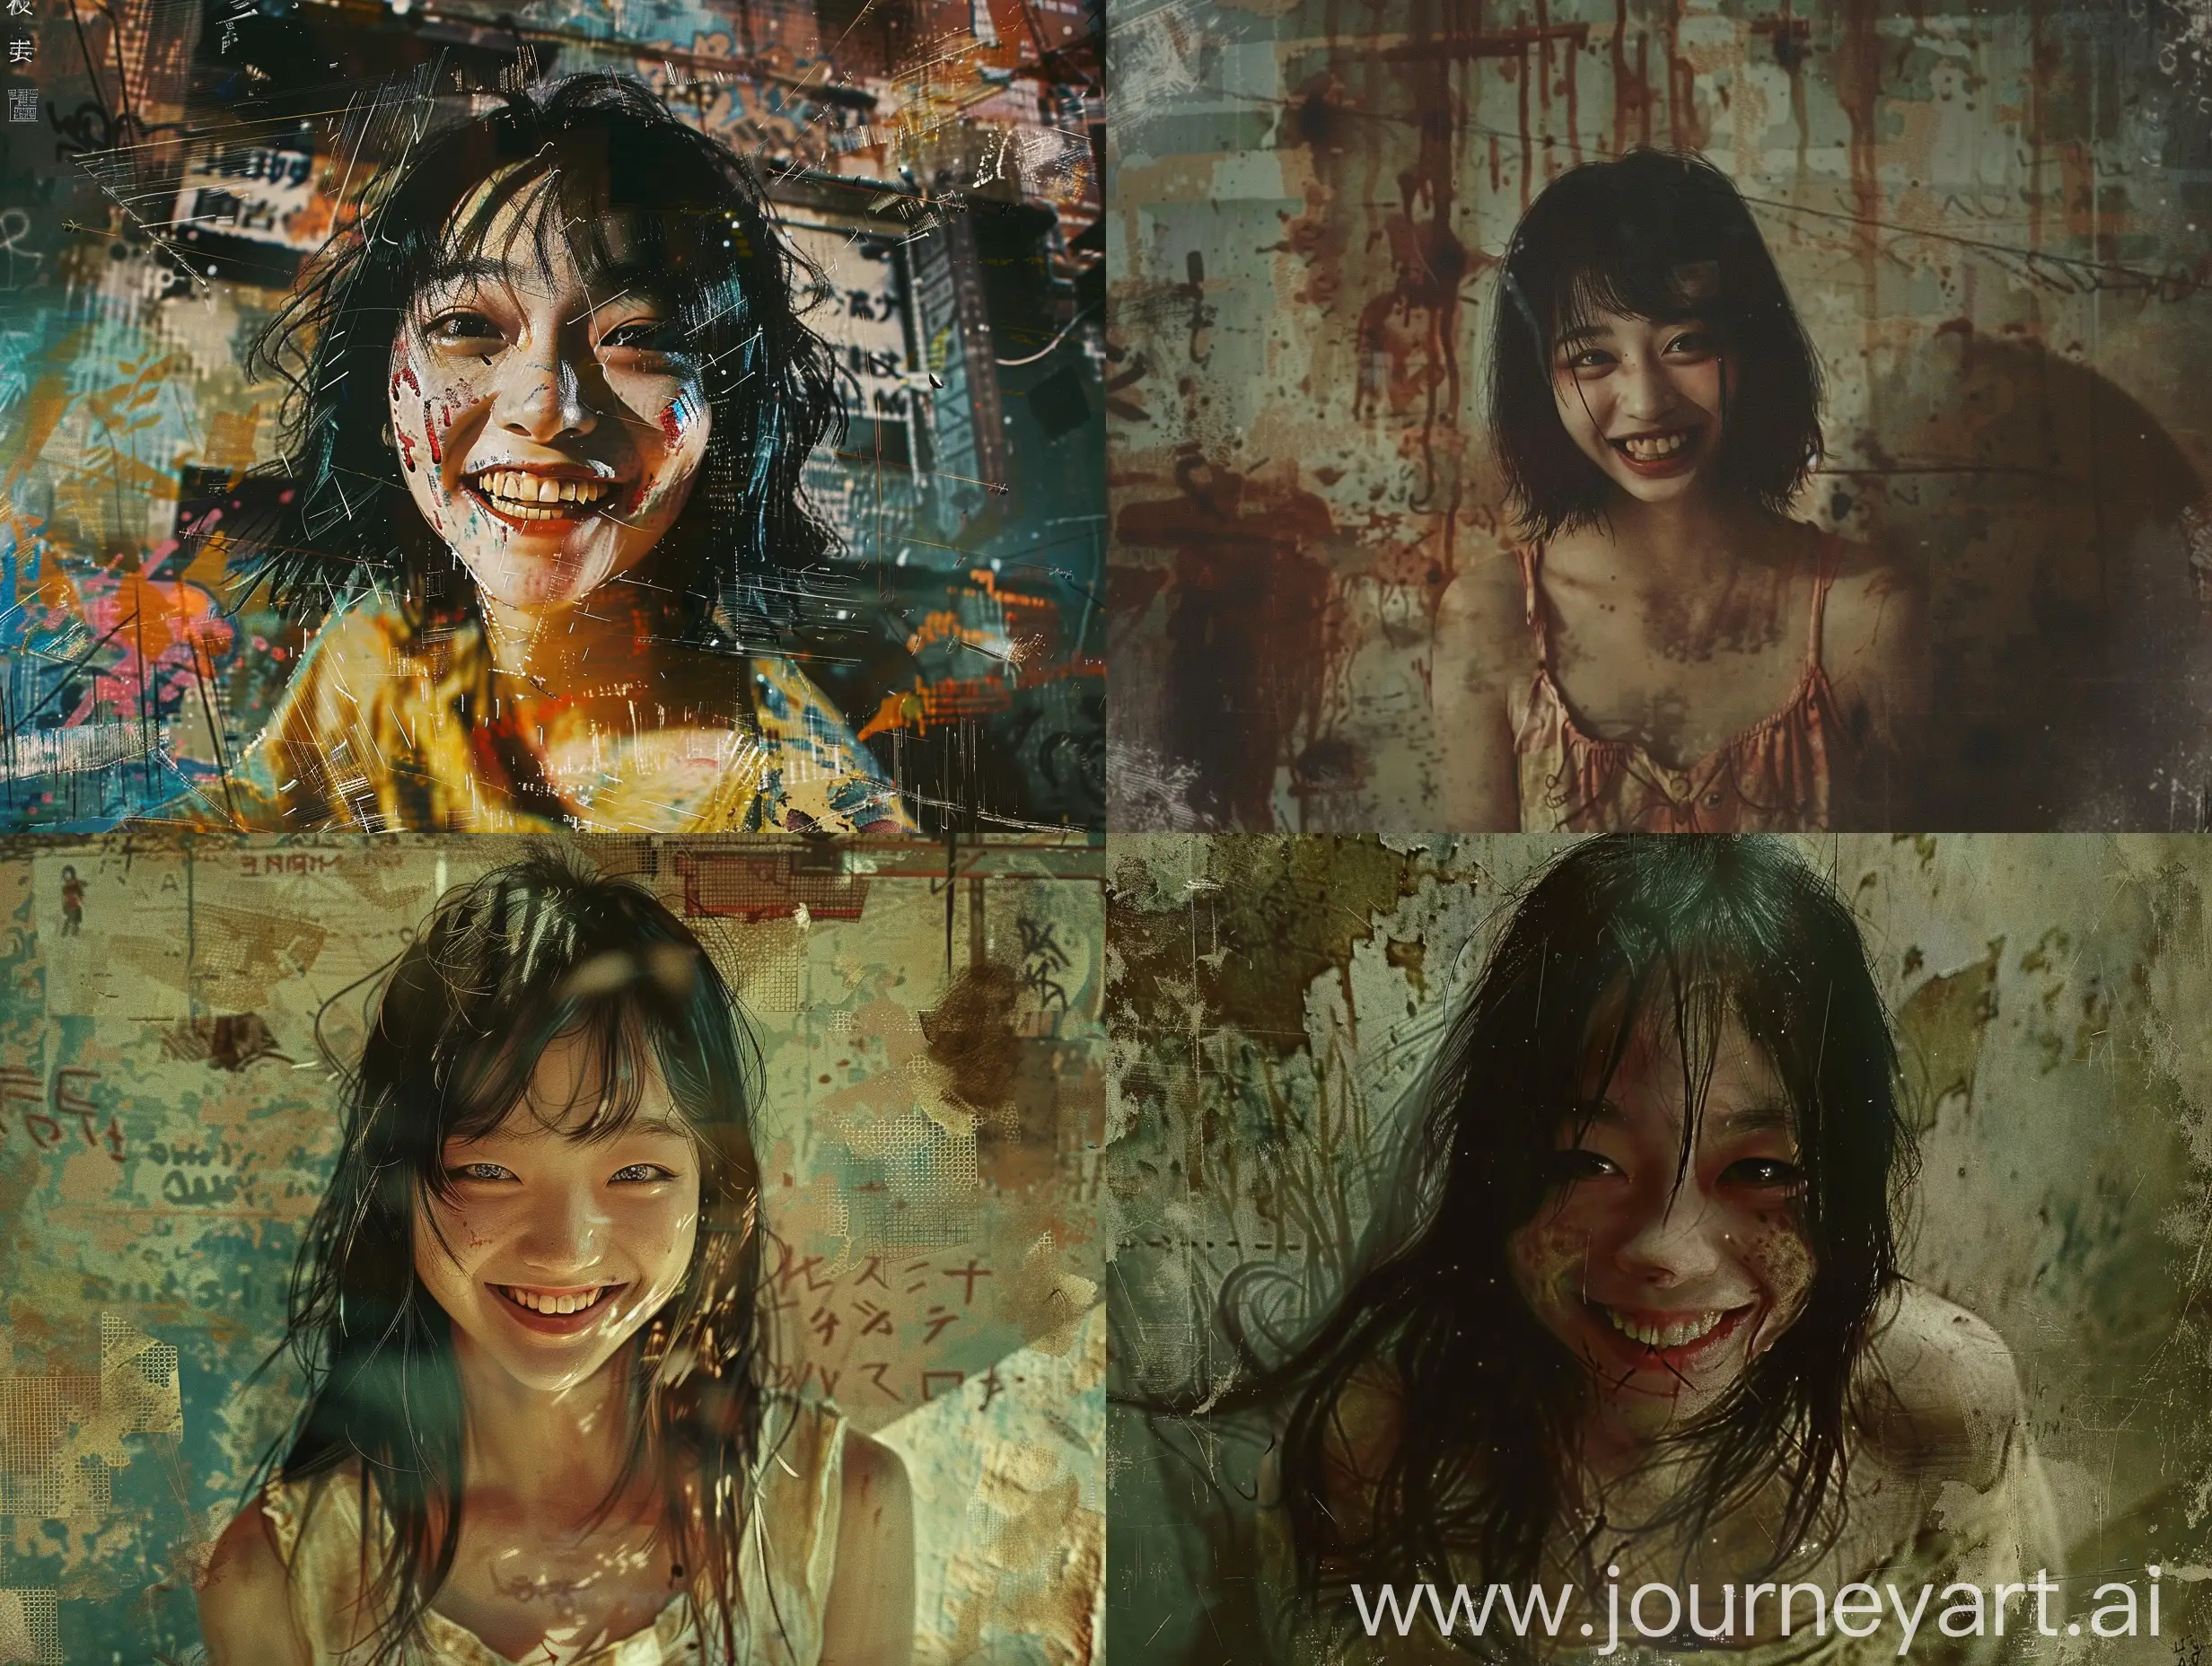 realistic movie stills, full body, full shot, wide shot, A Japanese movie star, girl, smile, realistic image, wabi-sabi art, abstract , random textures, random graffiti strokes, digital illustration, macabre, by suehiro maruo and junji ito, realism, clear light and shadow, movie texture, film photos, expired film, an amazing fantasy movie scene, strong dramatic tension, rich details, clear light and shadow, a strong sense of cinema